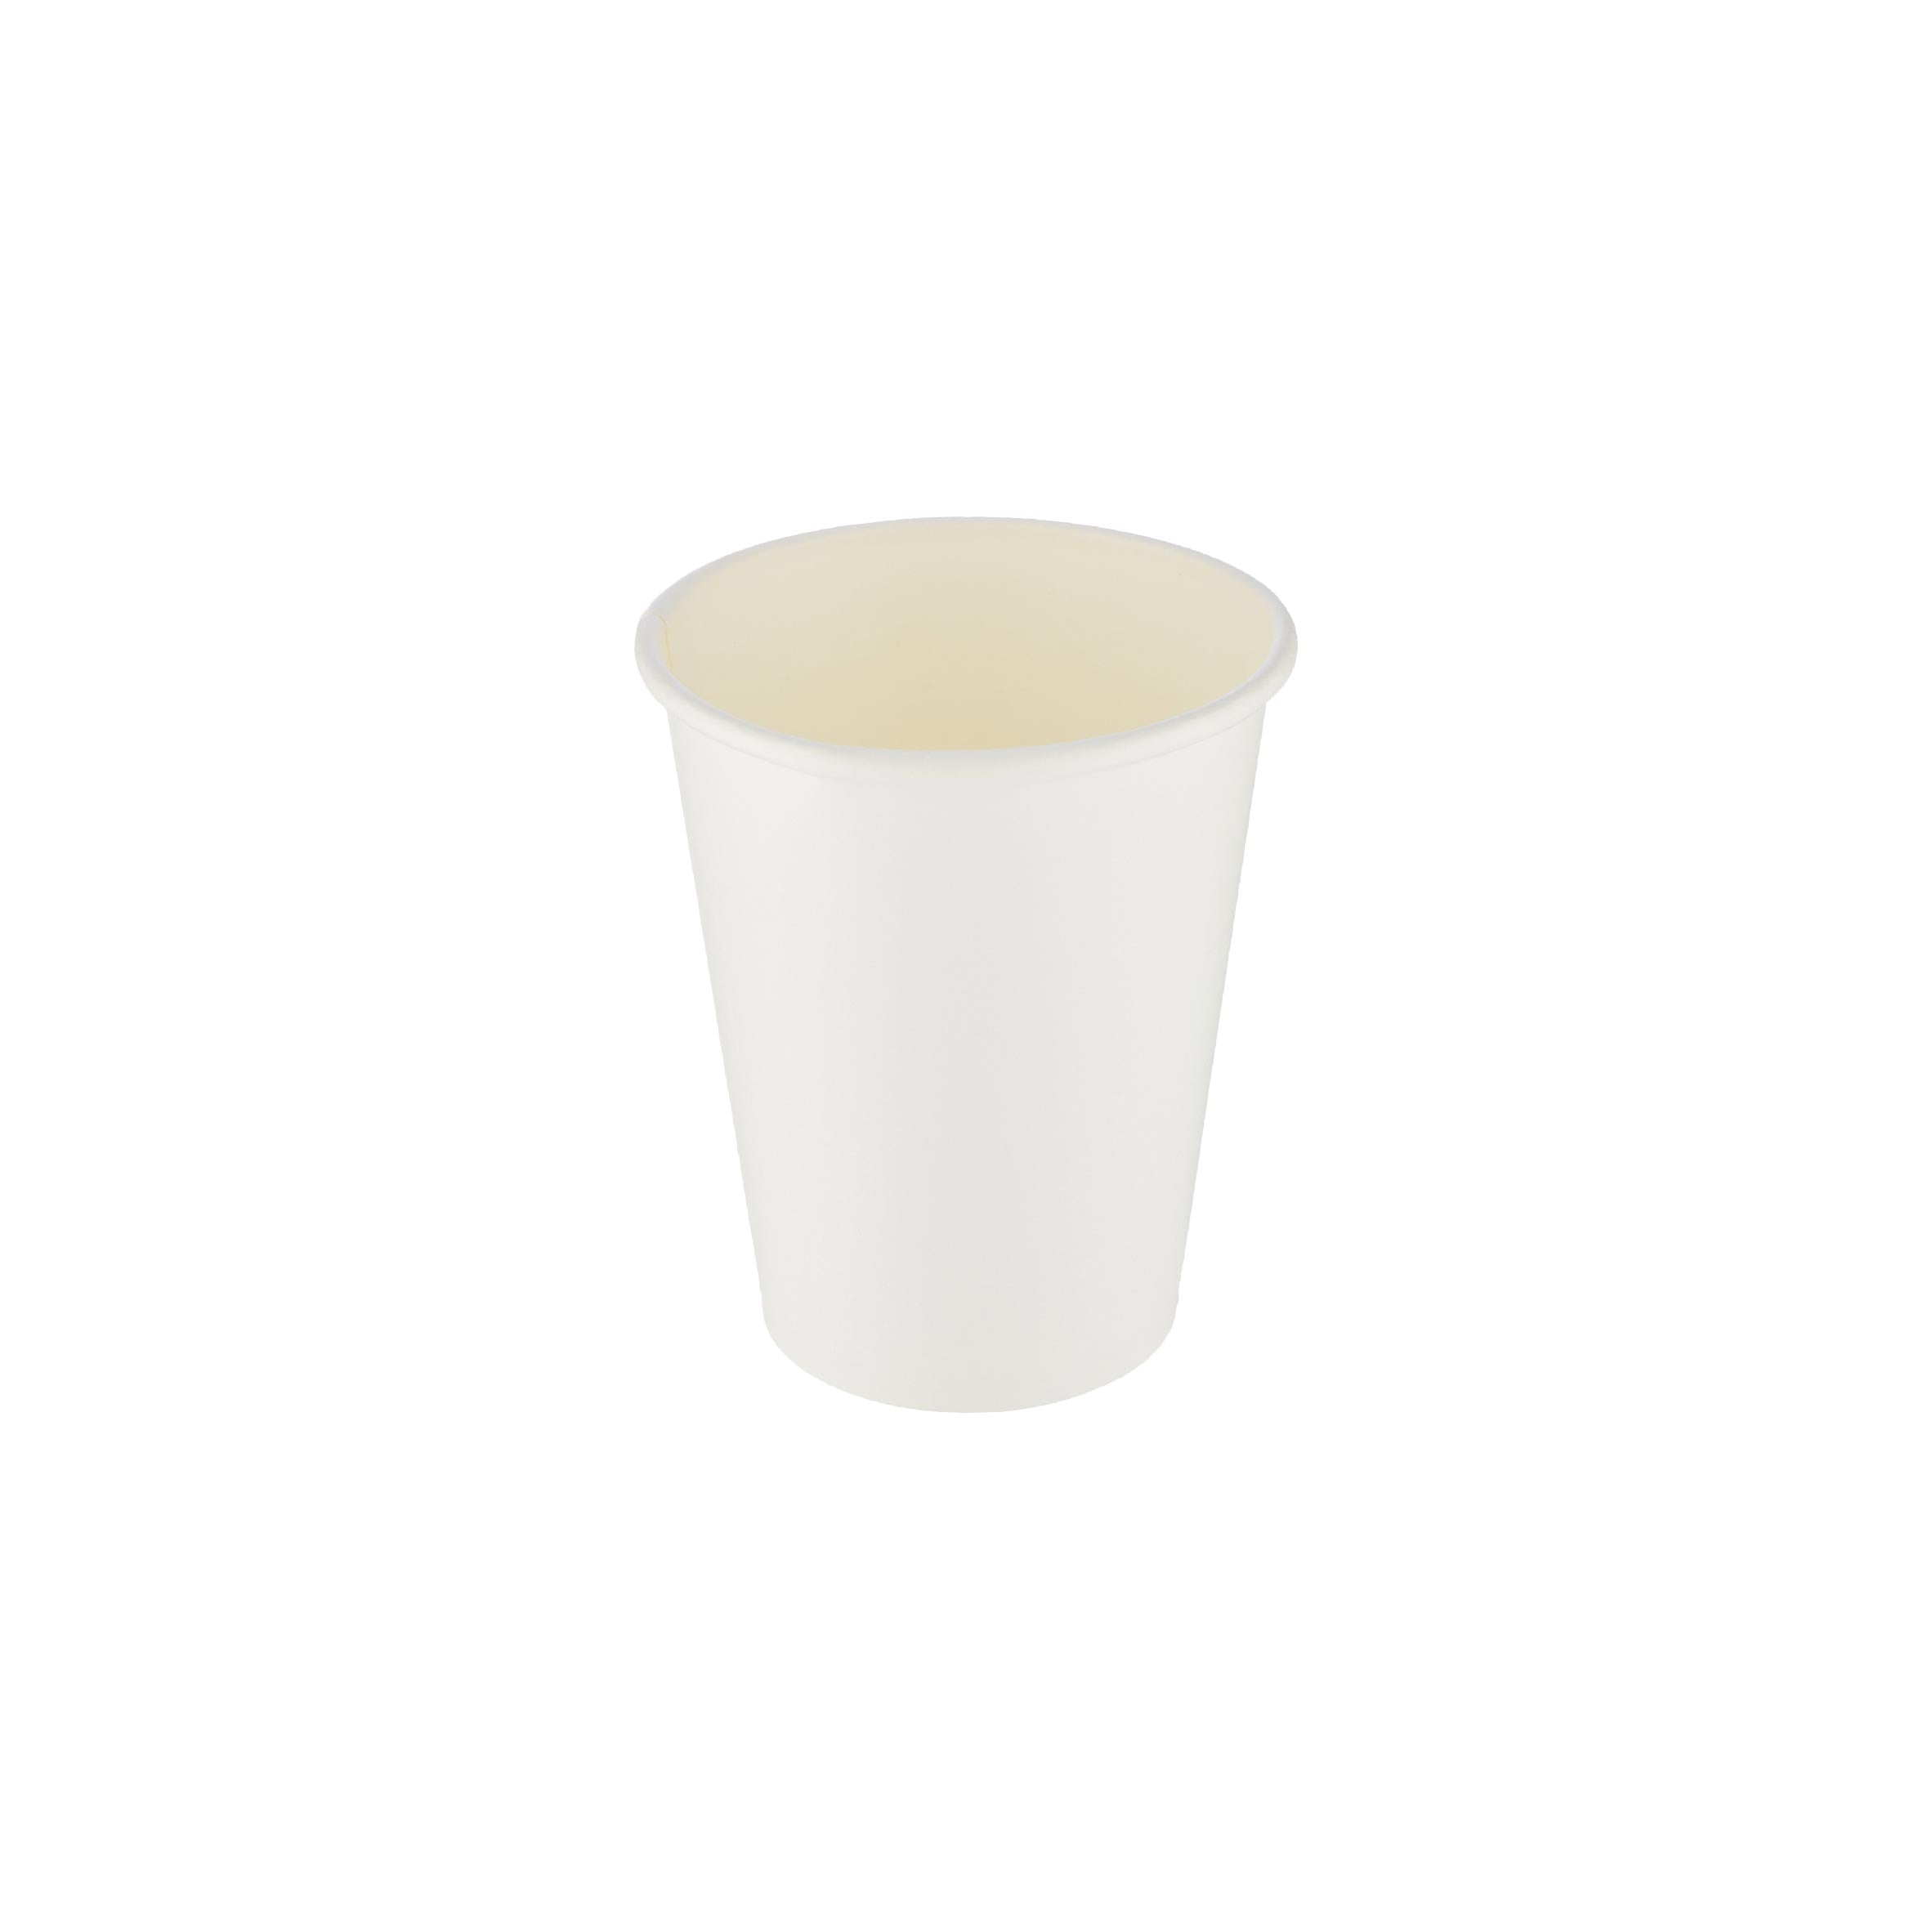 White Single Wall Paper Cup, 8 Oz (236 ml)| 1000 Pieces - Hotpack Bahrain